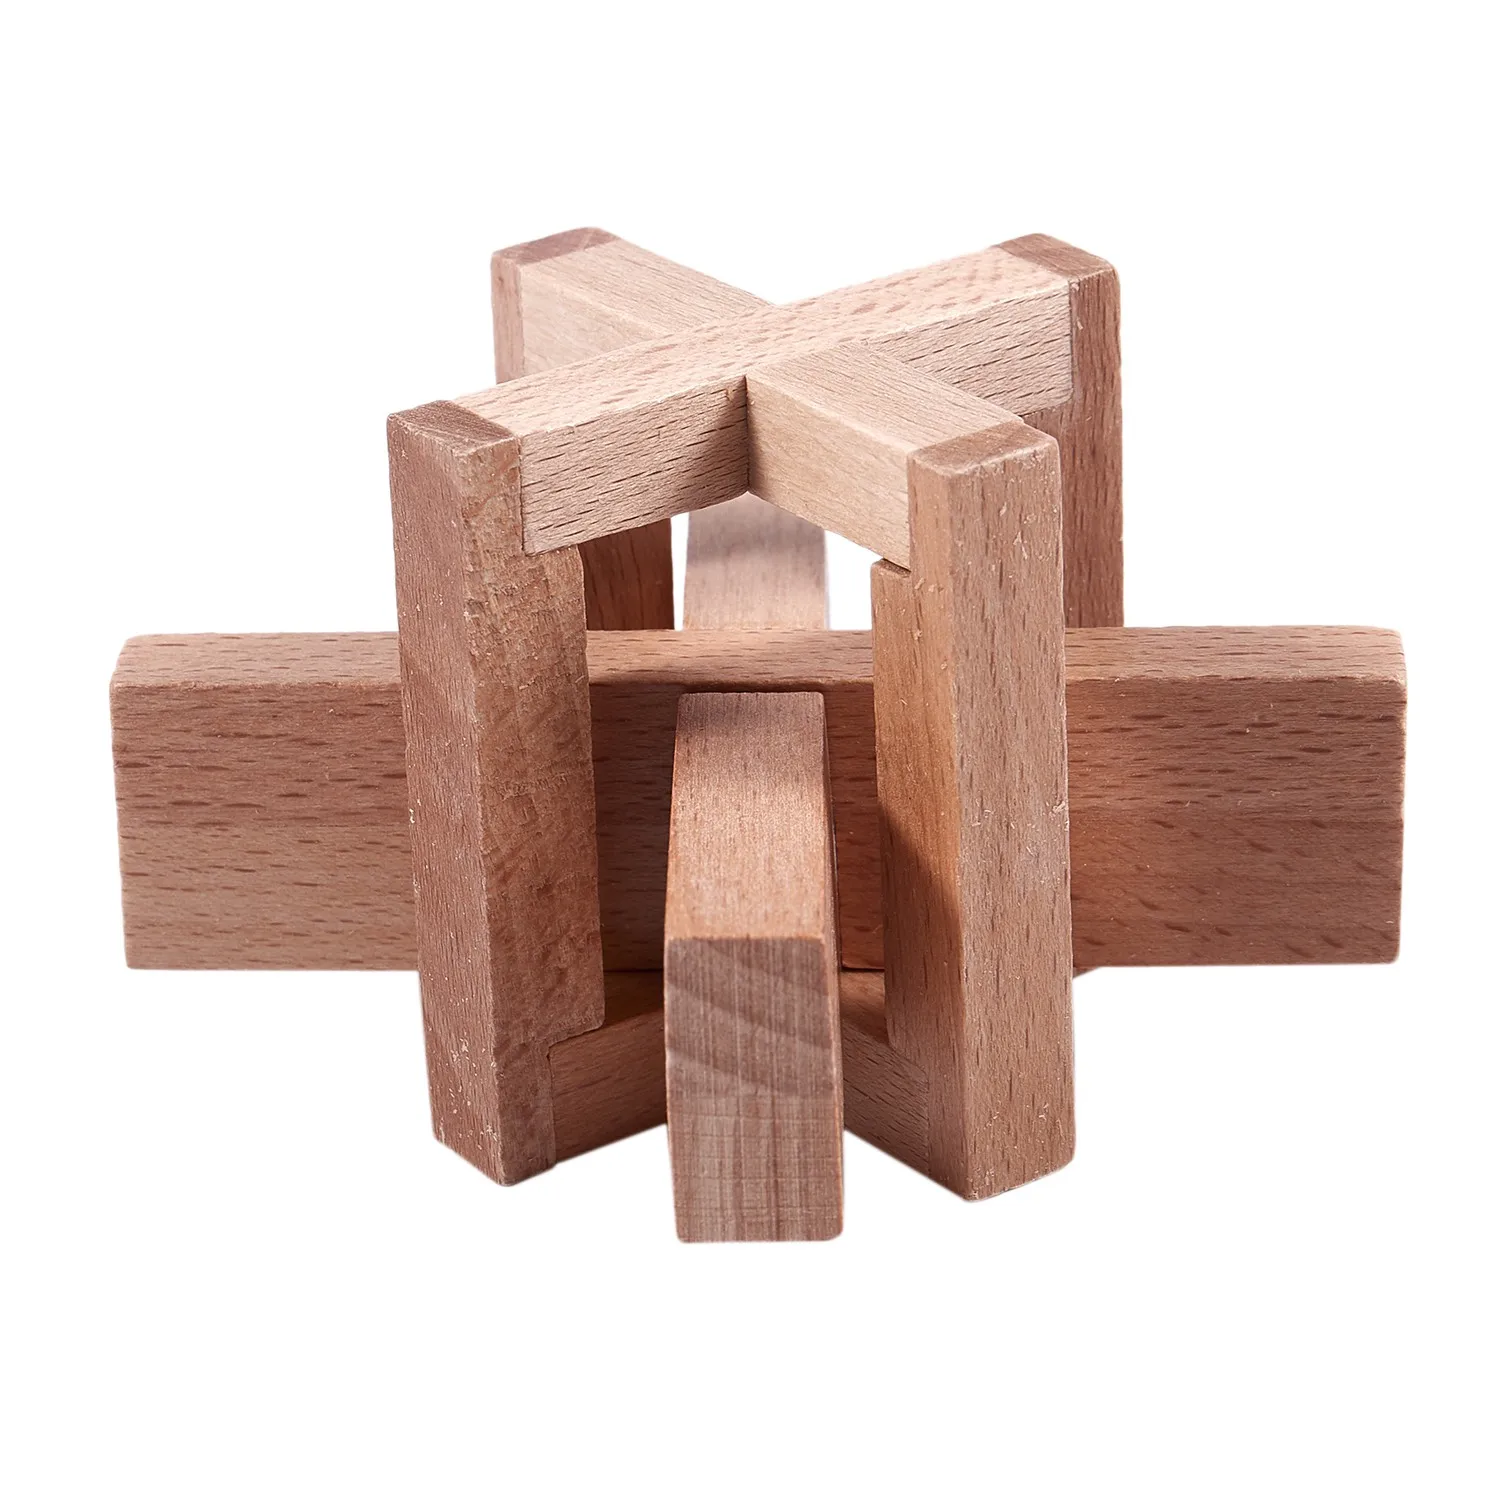 

Wooden Siege Lock the Perplexing X in a Box Logic Puzzle Burr Puzzles Brain Teaser Intellectual Toy